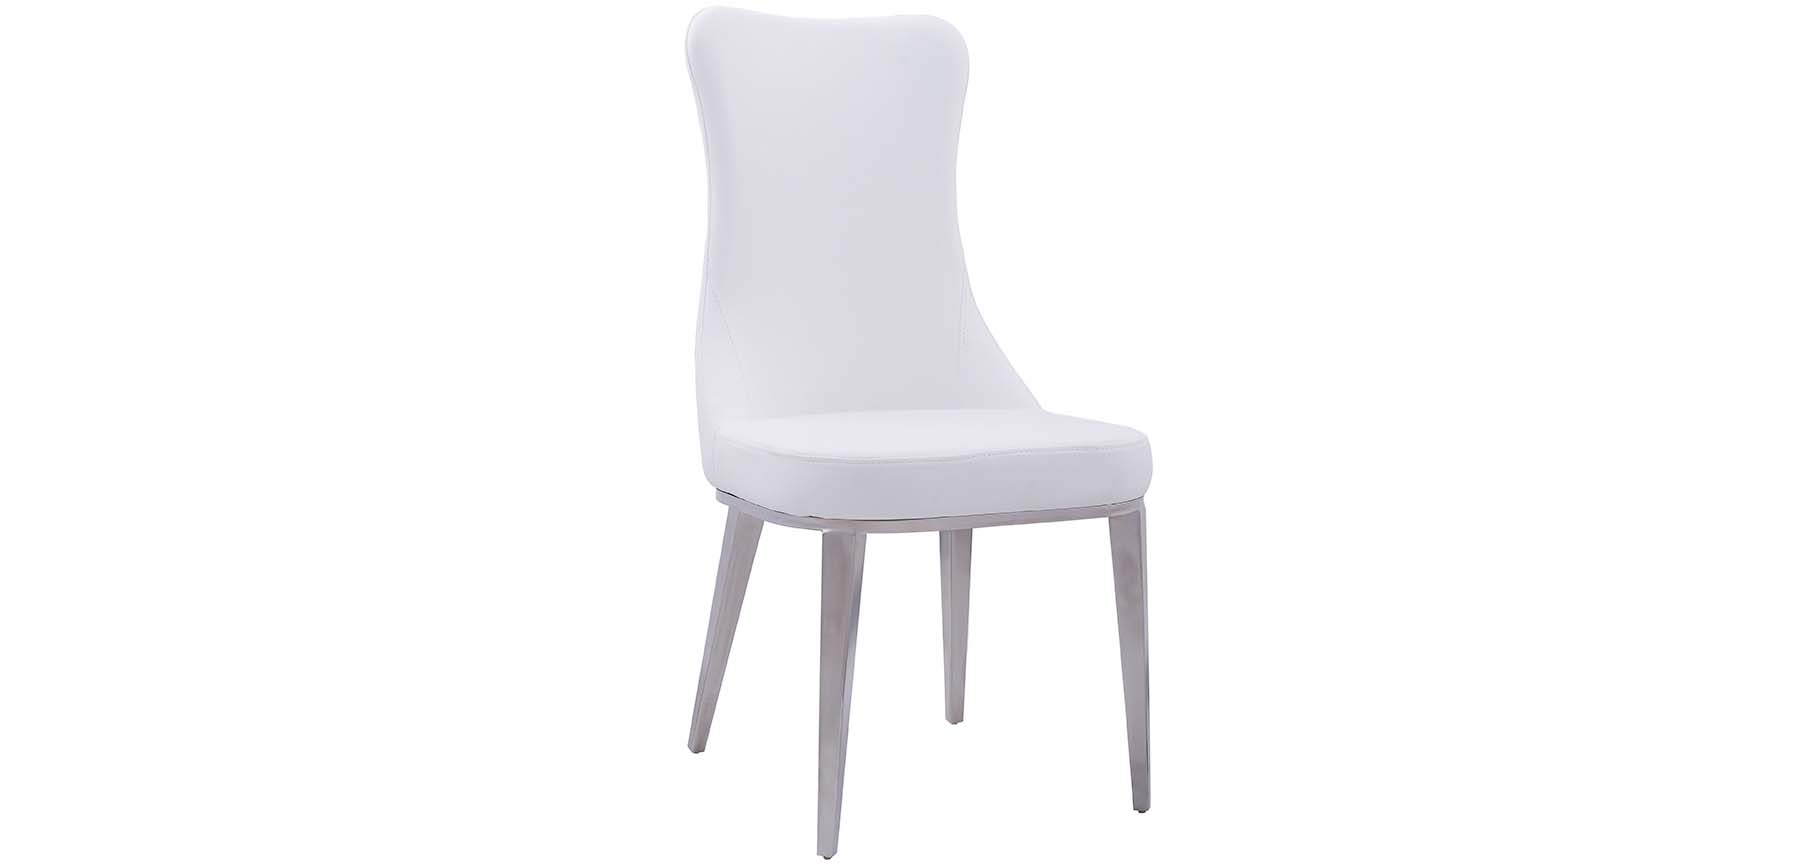 Bedroom Furniture Modern Bedrooms QS and KS 6138 Solid White (no pattern) Chair